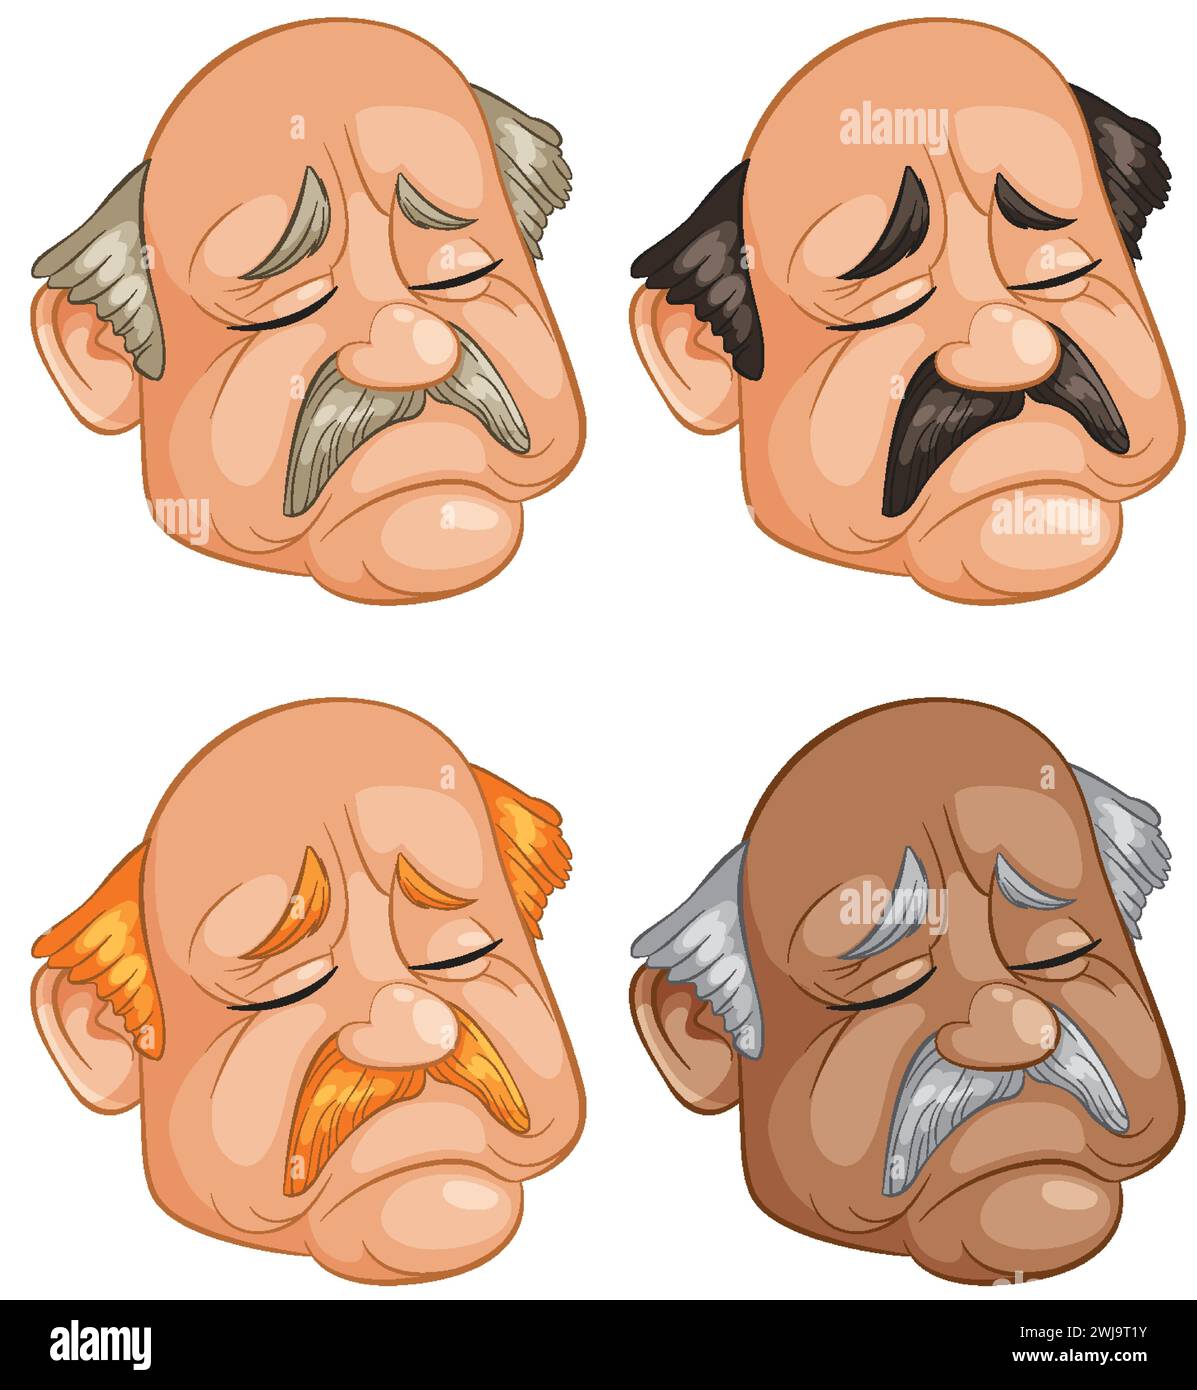 Four illustrations of elderly men with sorrowful expressions Stock Vector